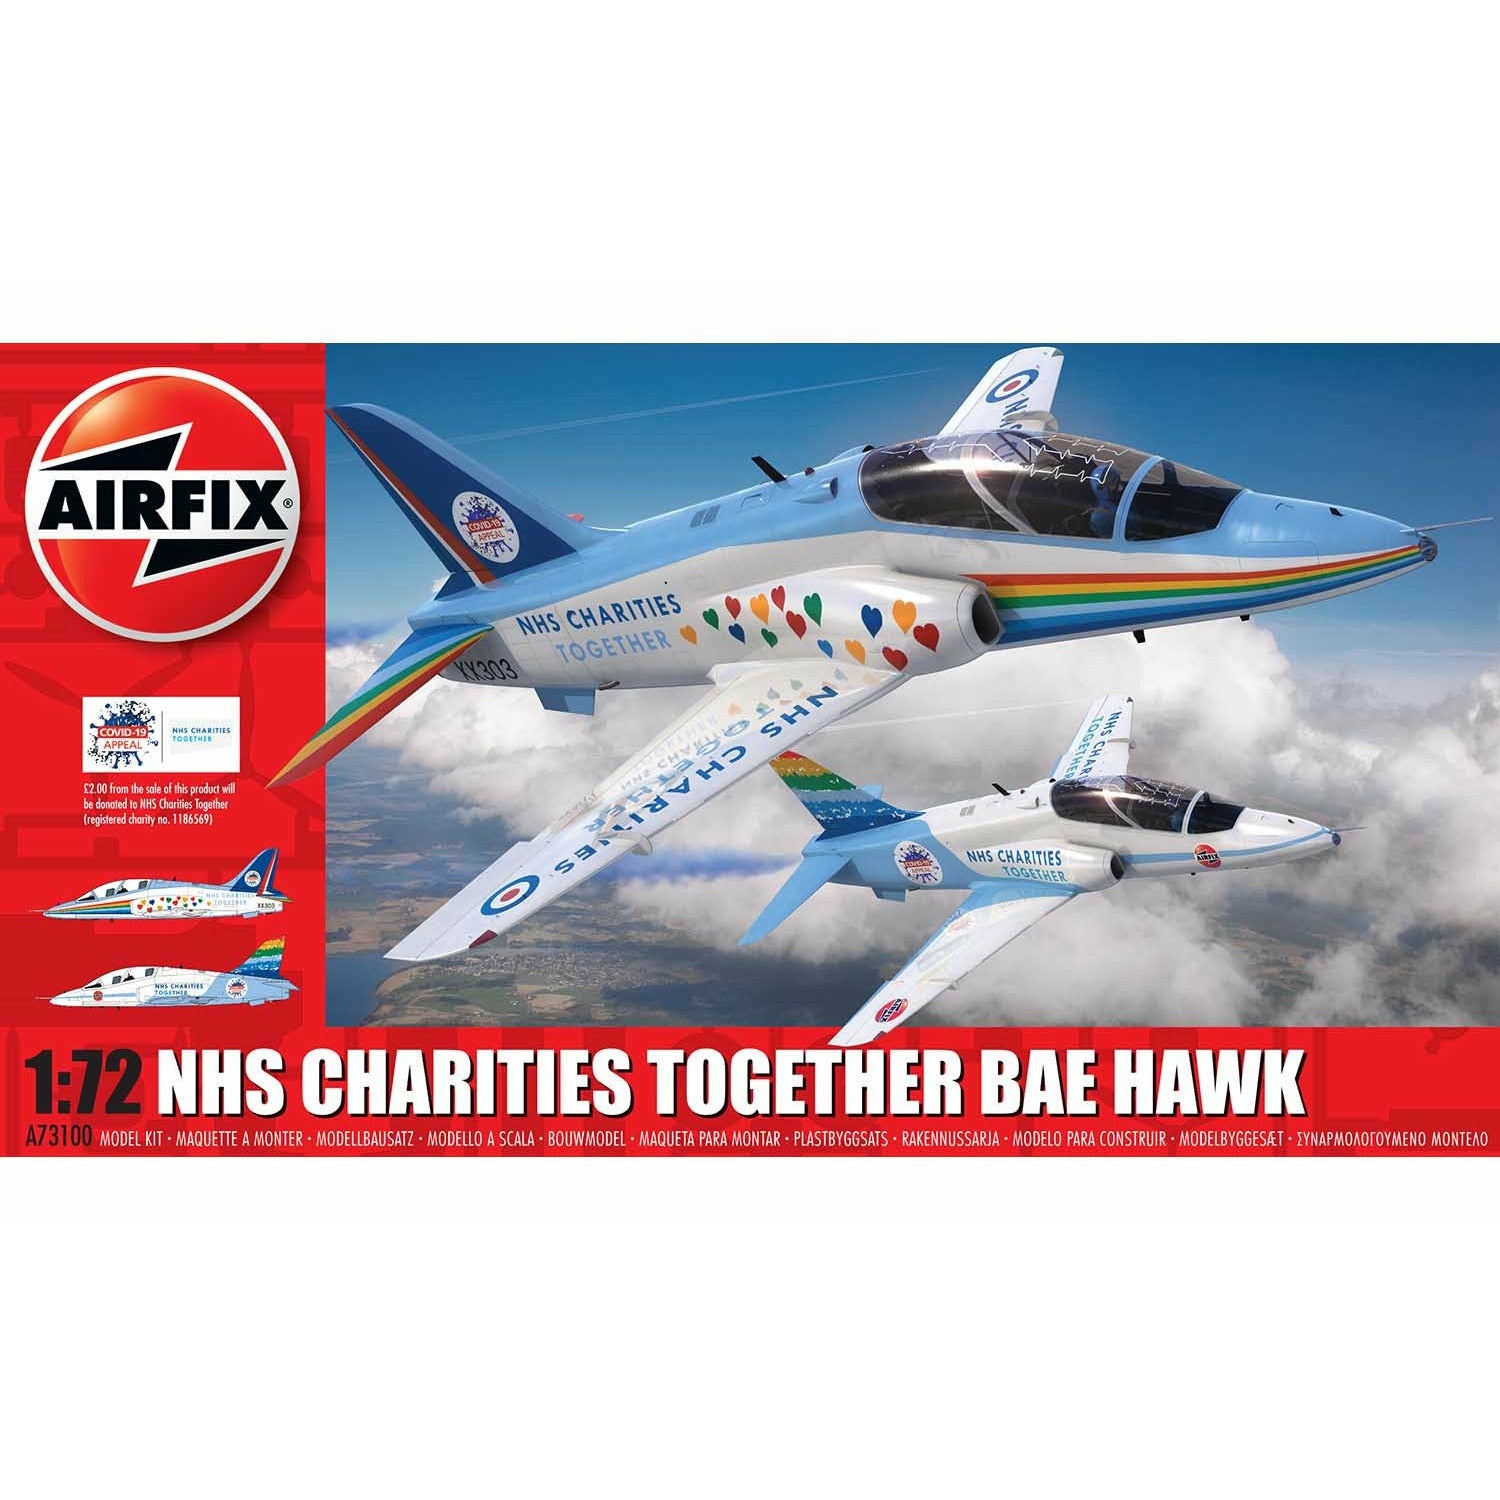 NHS Charities Together Bae Hawk 1/72 #73100 by Airfix